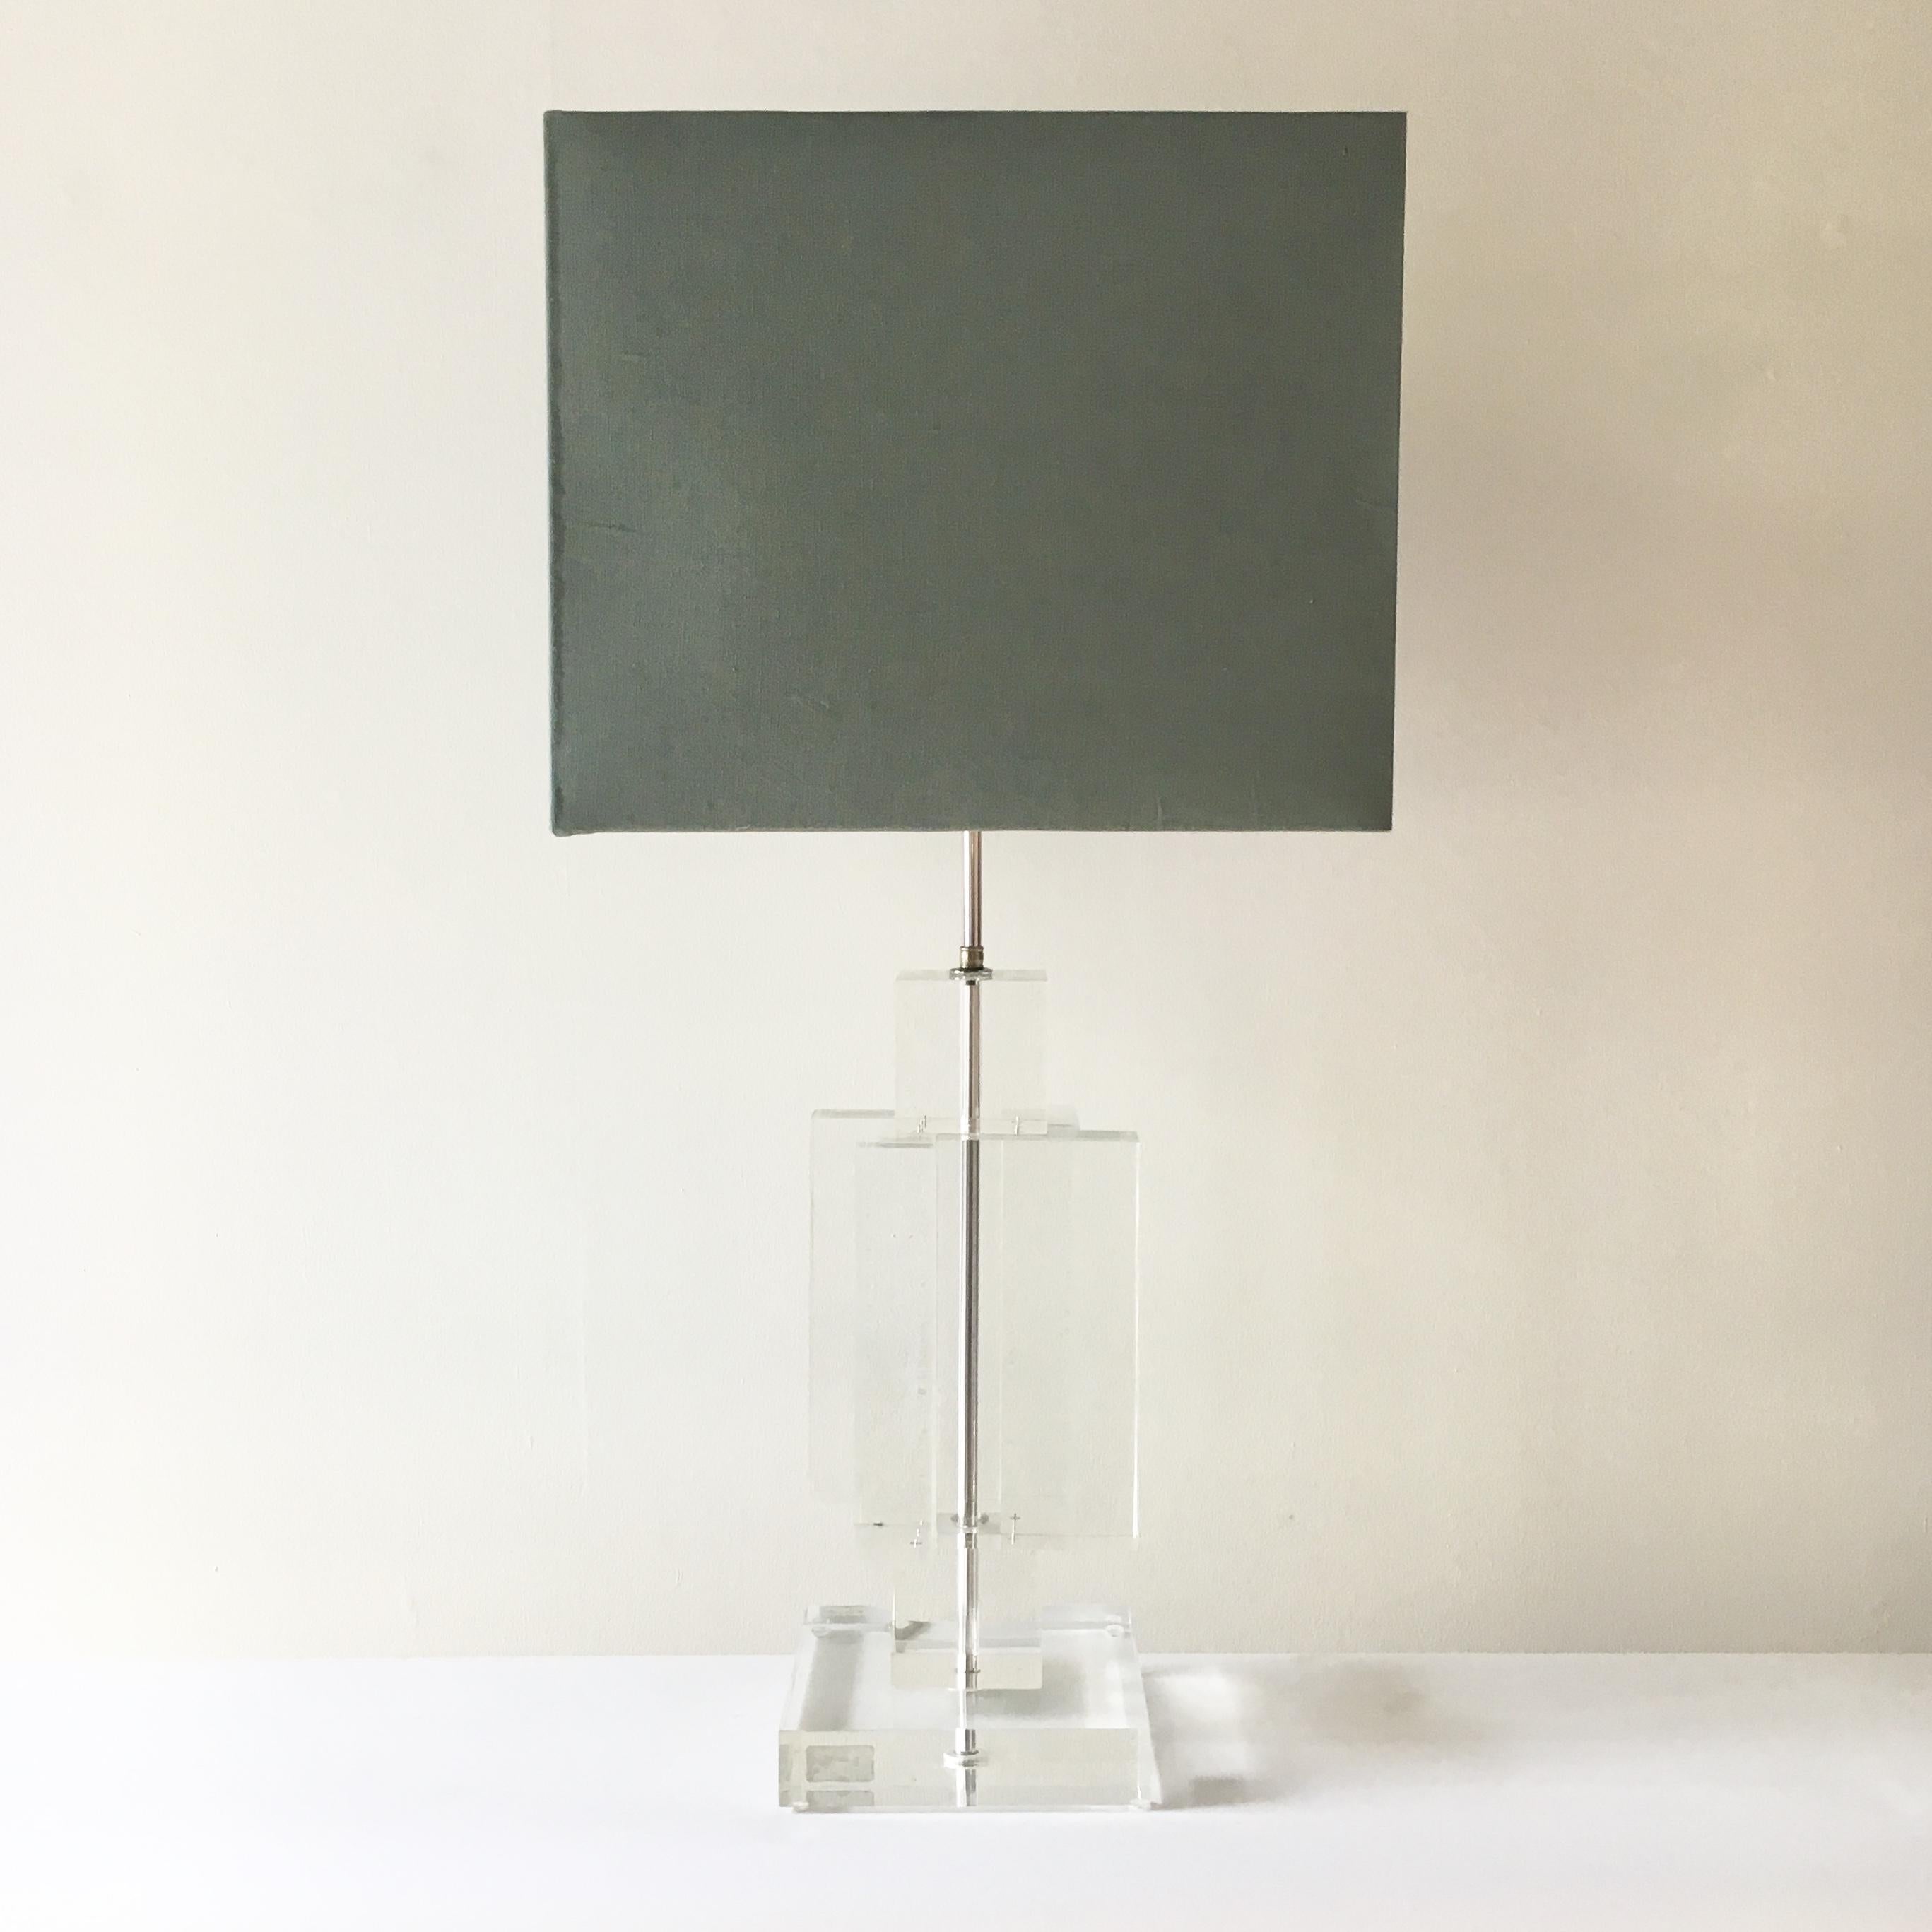 Monumental Lucite skyscraper table lamp with nickel stem designed and manufactured in France by 'Les Prismatique' and accompanied with Talisman's fabric shade.
Makers mark stamped to the nickel on top of the Lucite.